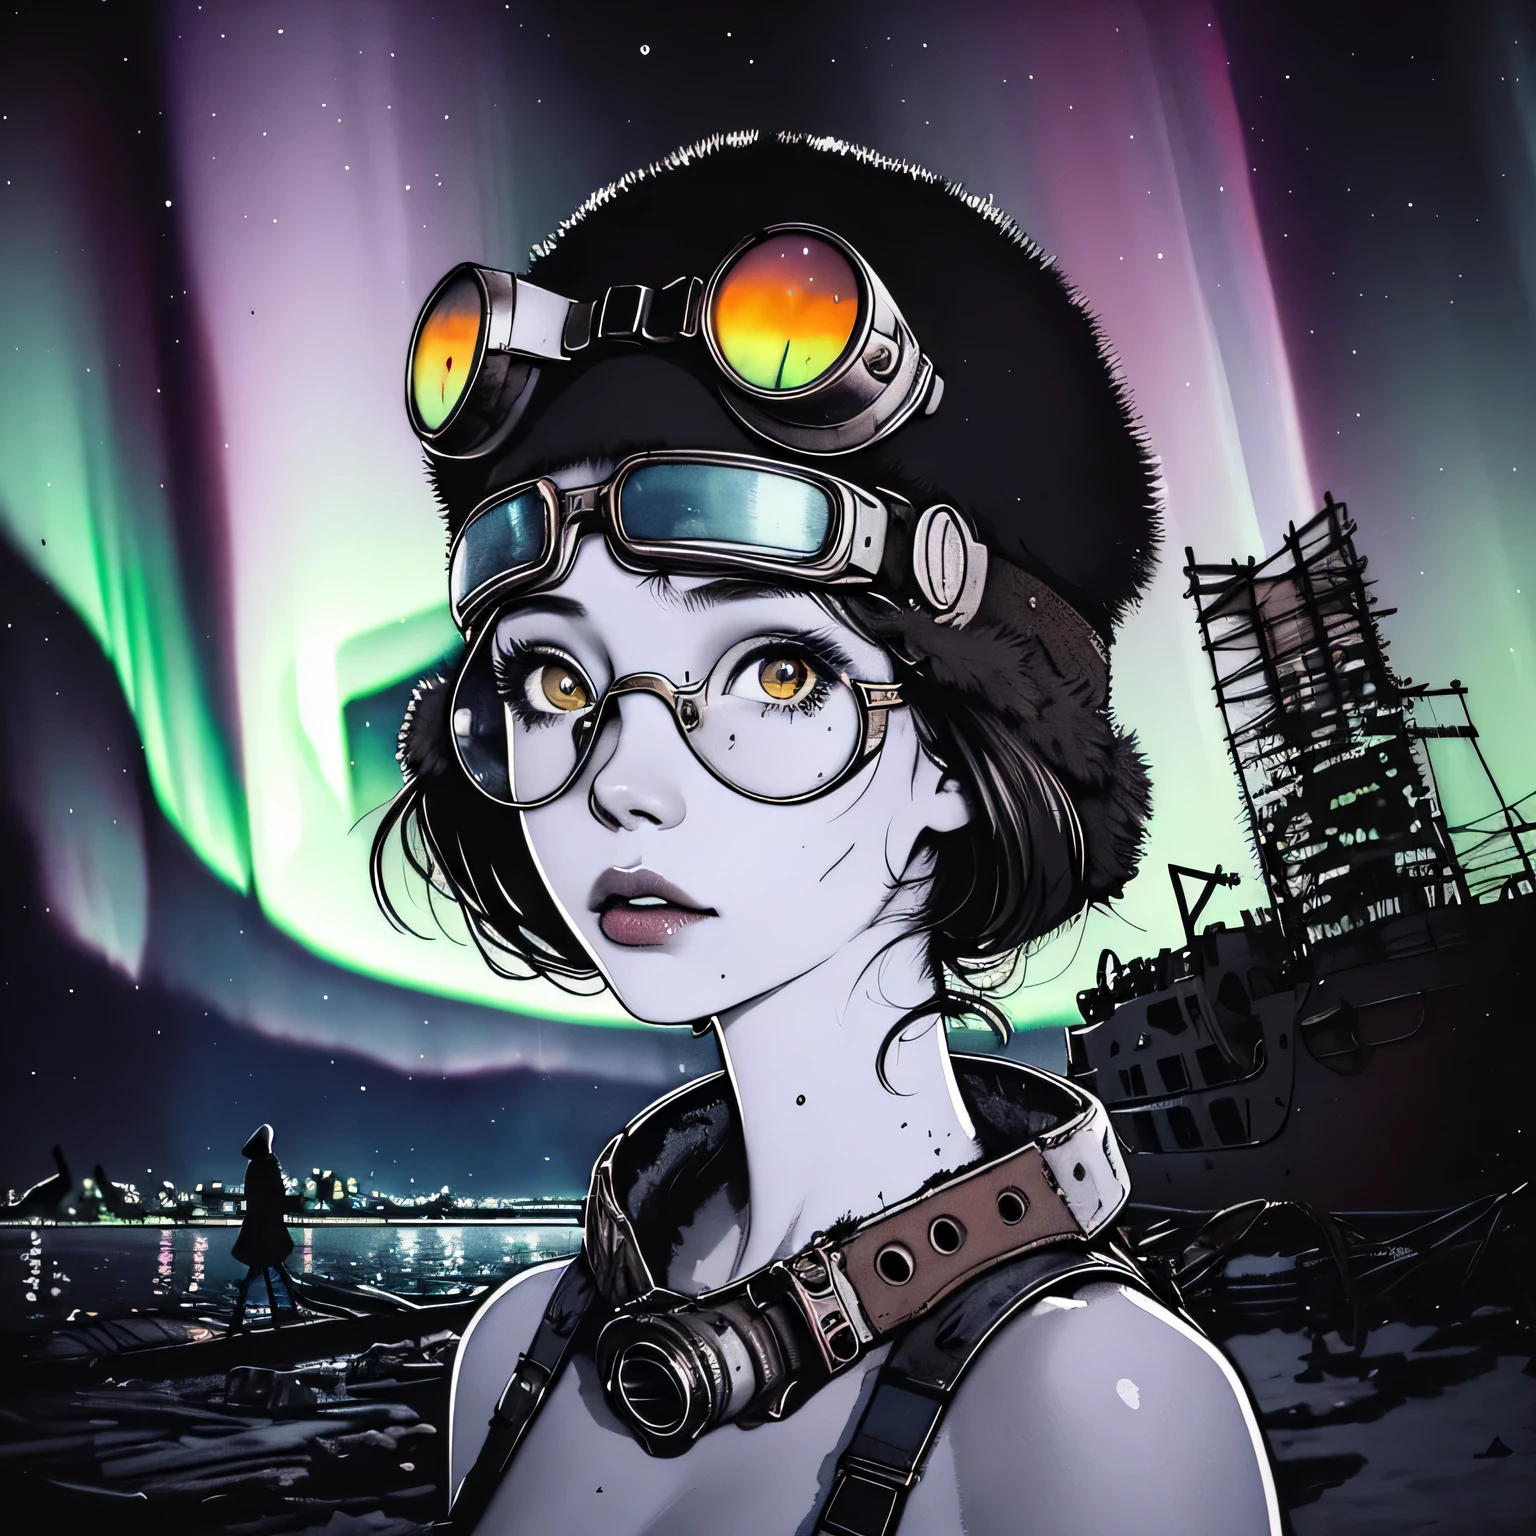 masterpiece, best quality, (closeup face:1,2), 1girl, standing, stare up, look up, goggles on head, (polar lights:1.2), aurora borealis, city ruins, night, winter, colorful, refflections in goggles, wrecked rusty ship in background, desolate, watercolor, sketch, (close up shot:1.4)